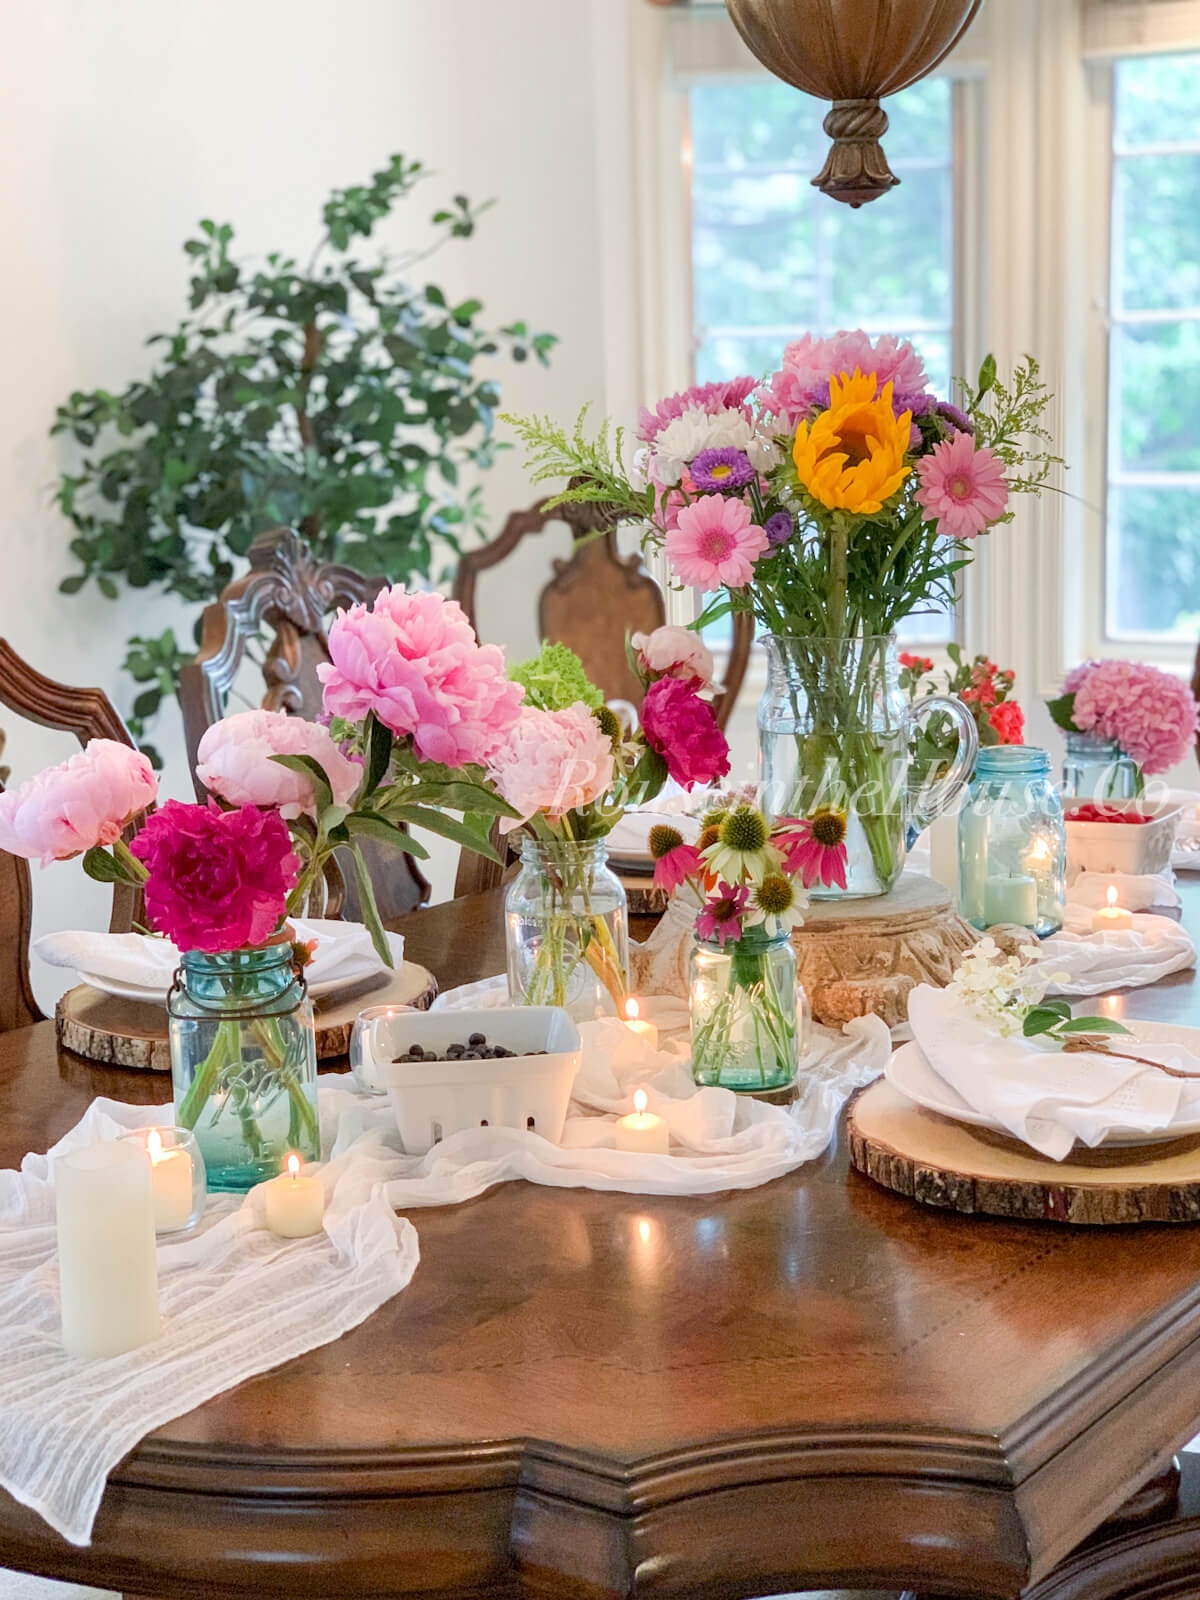 A romantic, country tablescape. A white muslin table runner is draped over a wood table top. Peony, hydrangea, coneflower and mixed flower arrangements in mason jars are along the runner. A large arrangement in a country pitcher is on a distressed pedestal in the center of the table.